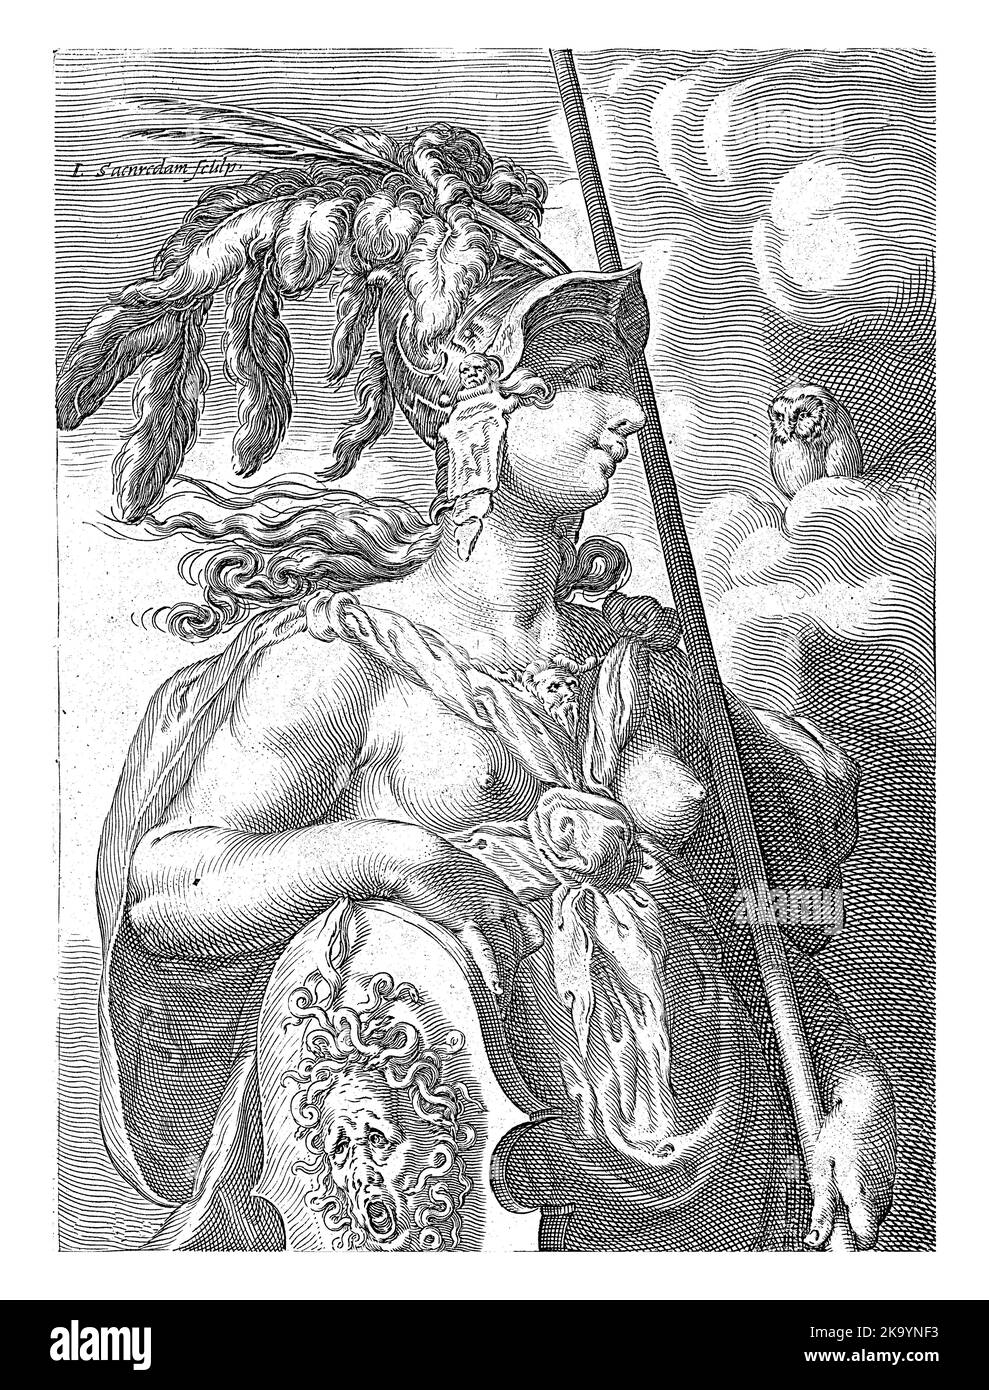 Minerva, with a helmet, a spear and the shield of Medusa. She looks at an owl in the clouds. Stock Photo